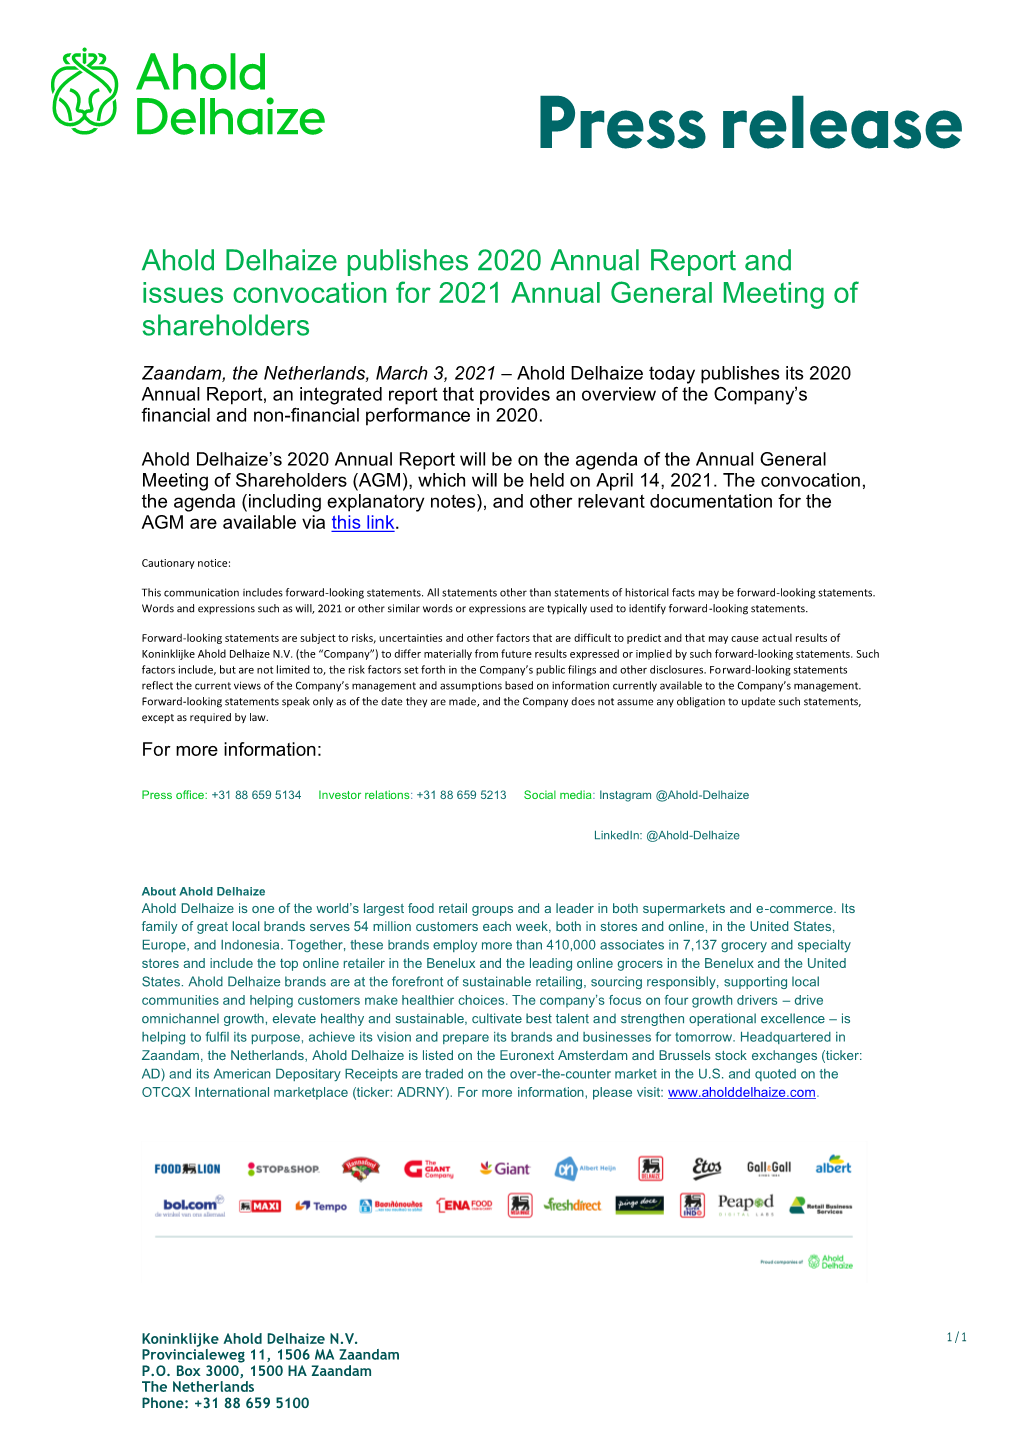 Ahold Delhaize Publishes 2020 Annual Report and Issues Convocation for 2021 Annual General Meeting of Shareholders